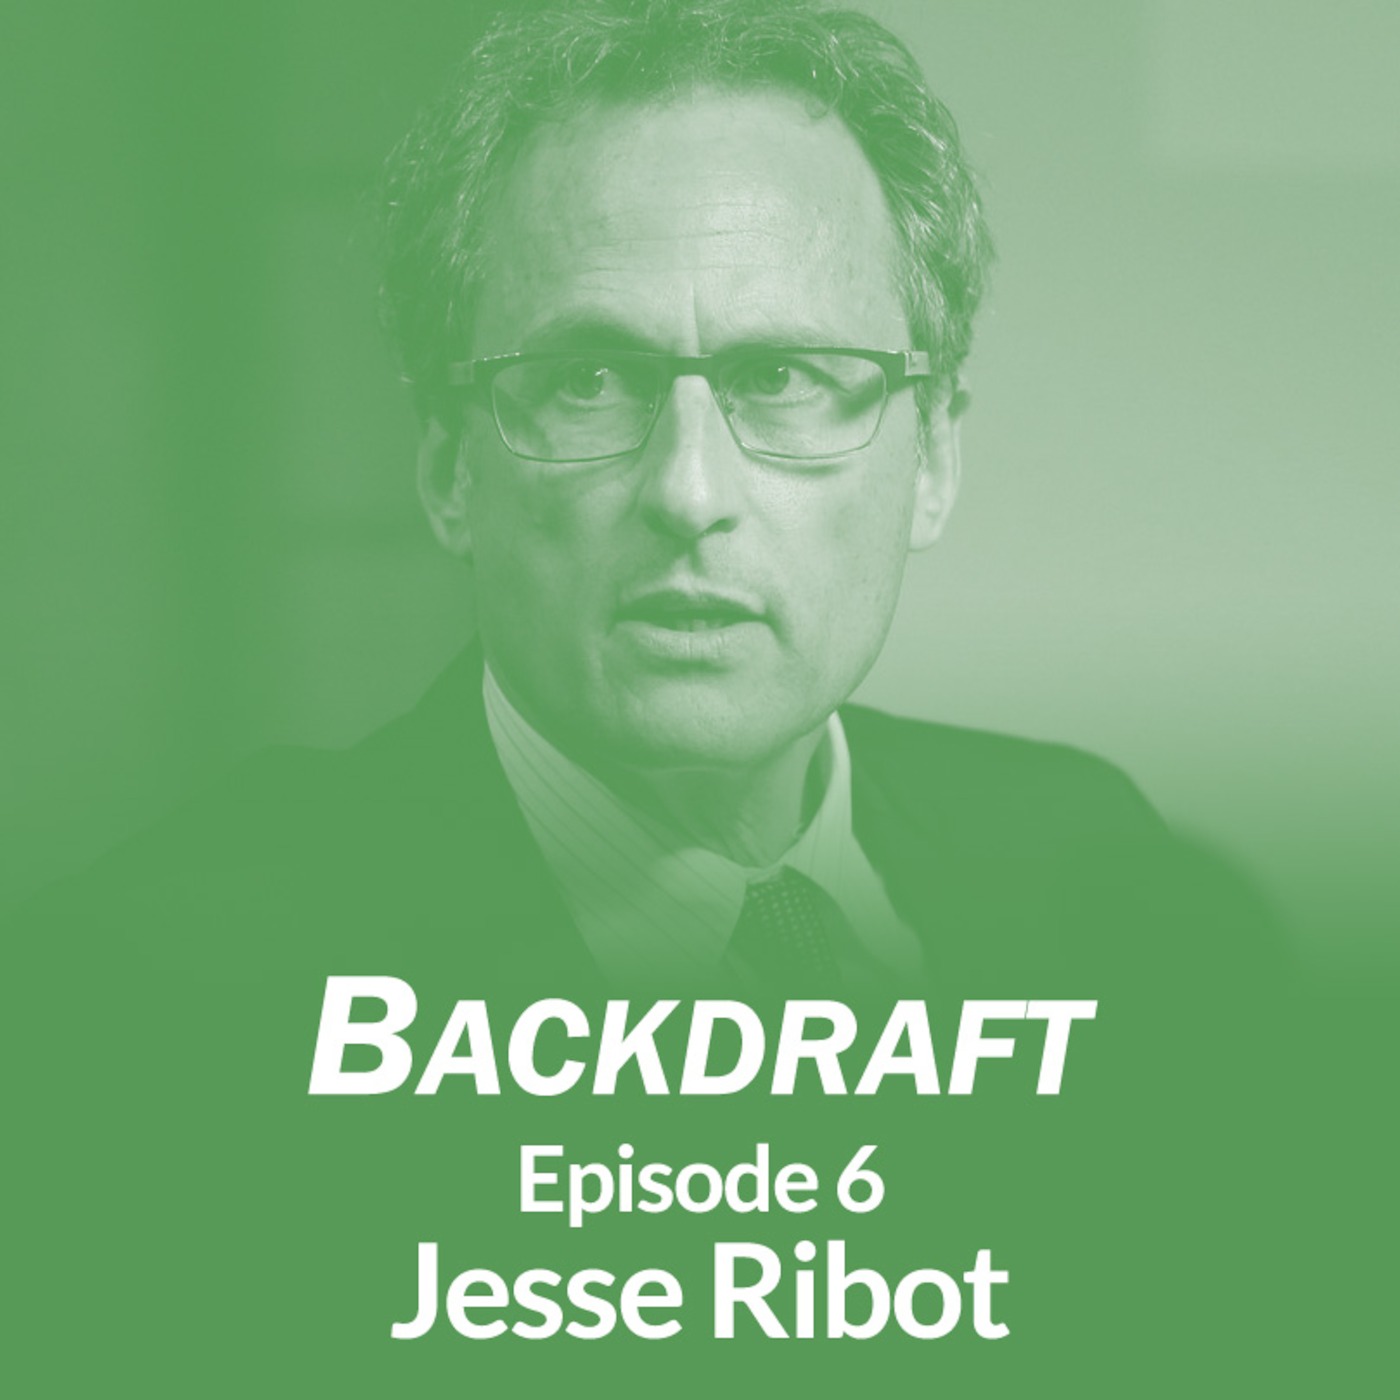 Backdraft #6: Jesse Ribot on Why It’s So Important for Climate Interventions to Work Through Local Democracy